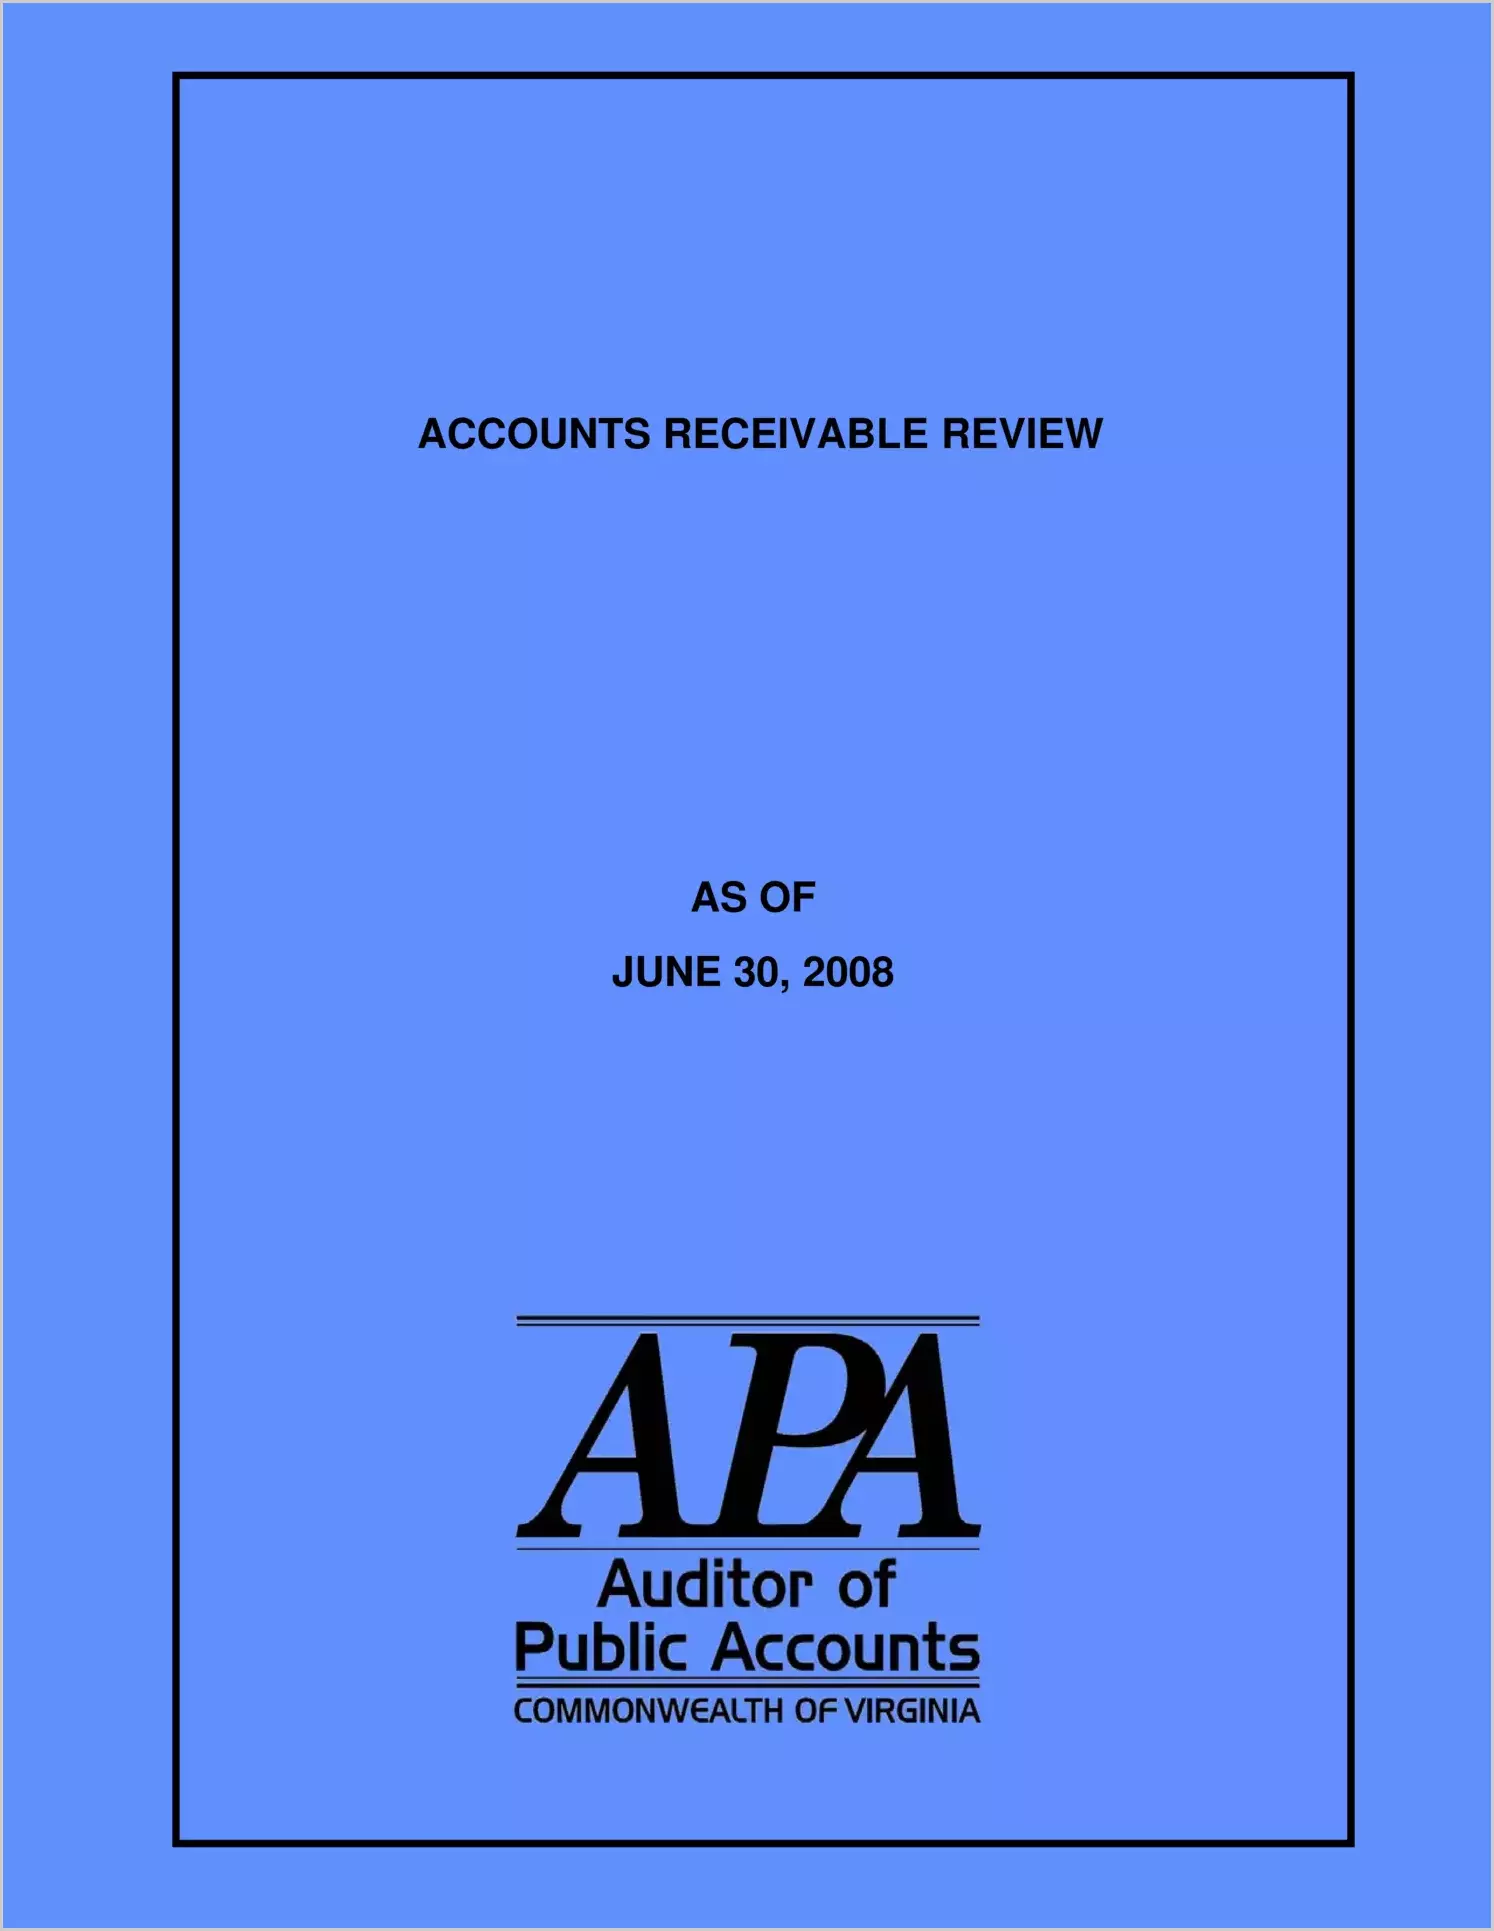 Accounts Receivable Review as of June 30, 2008